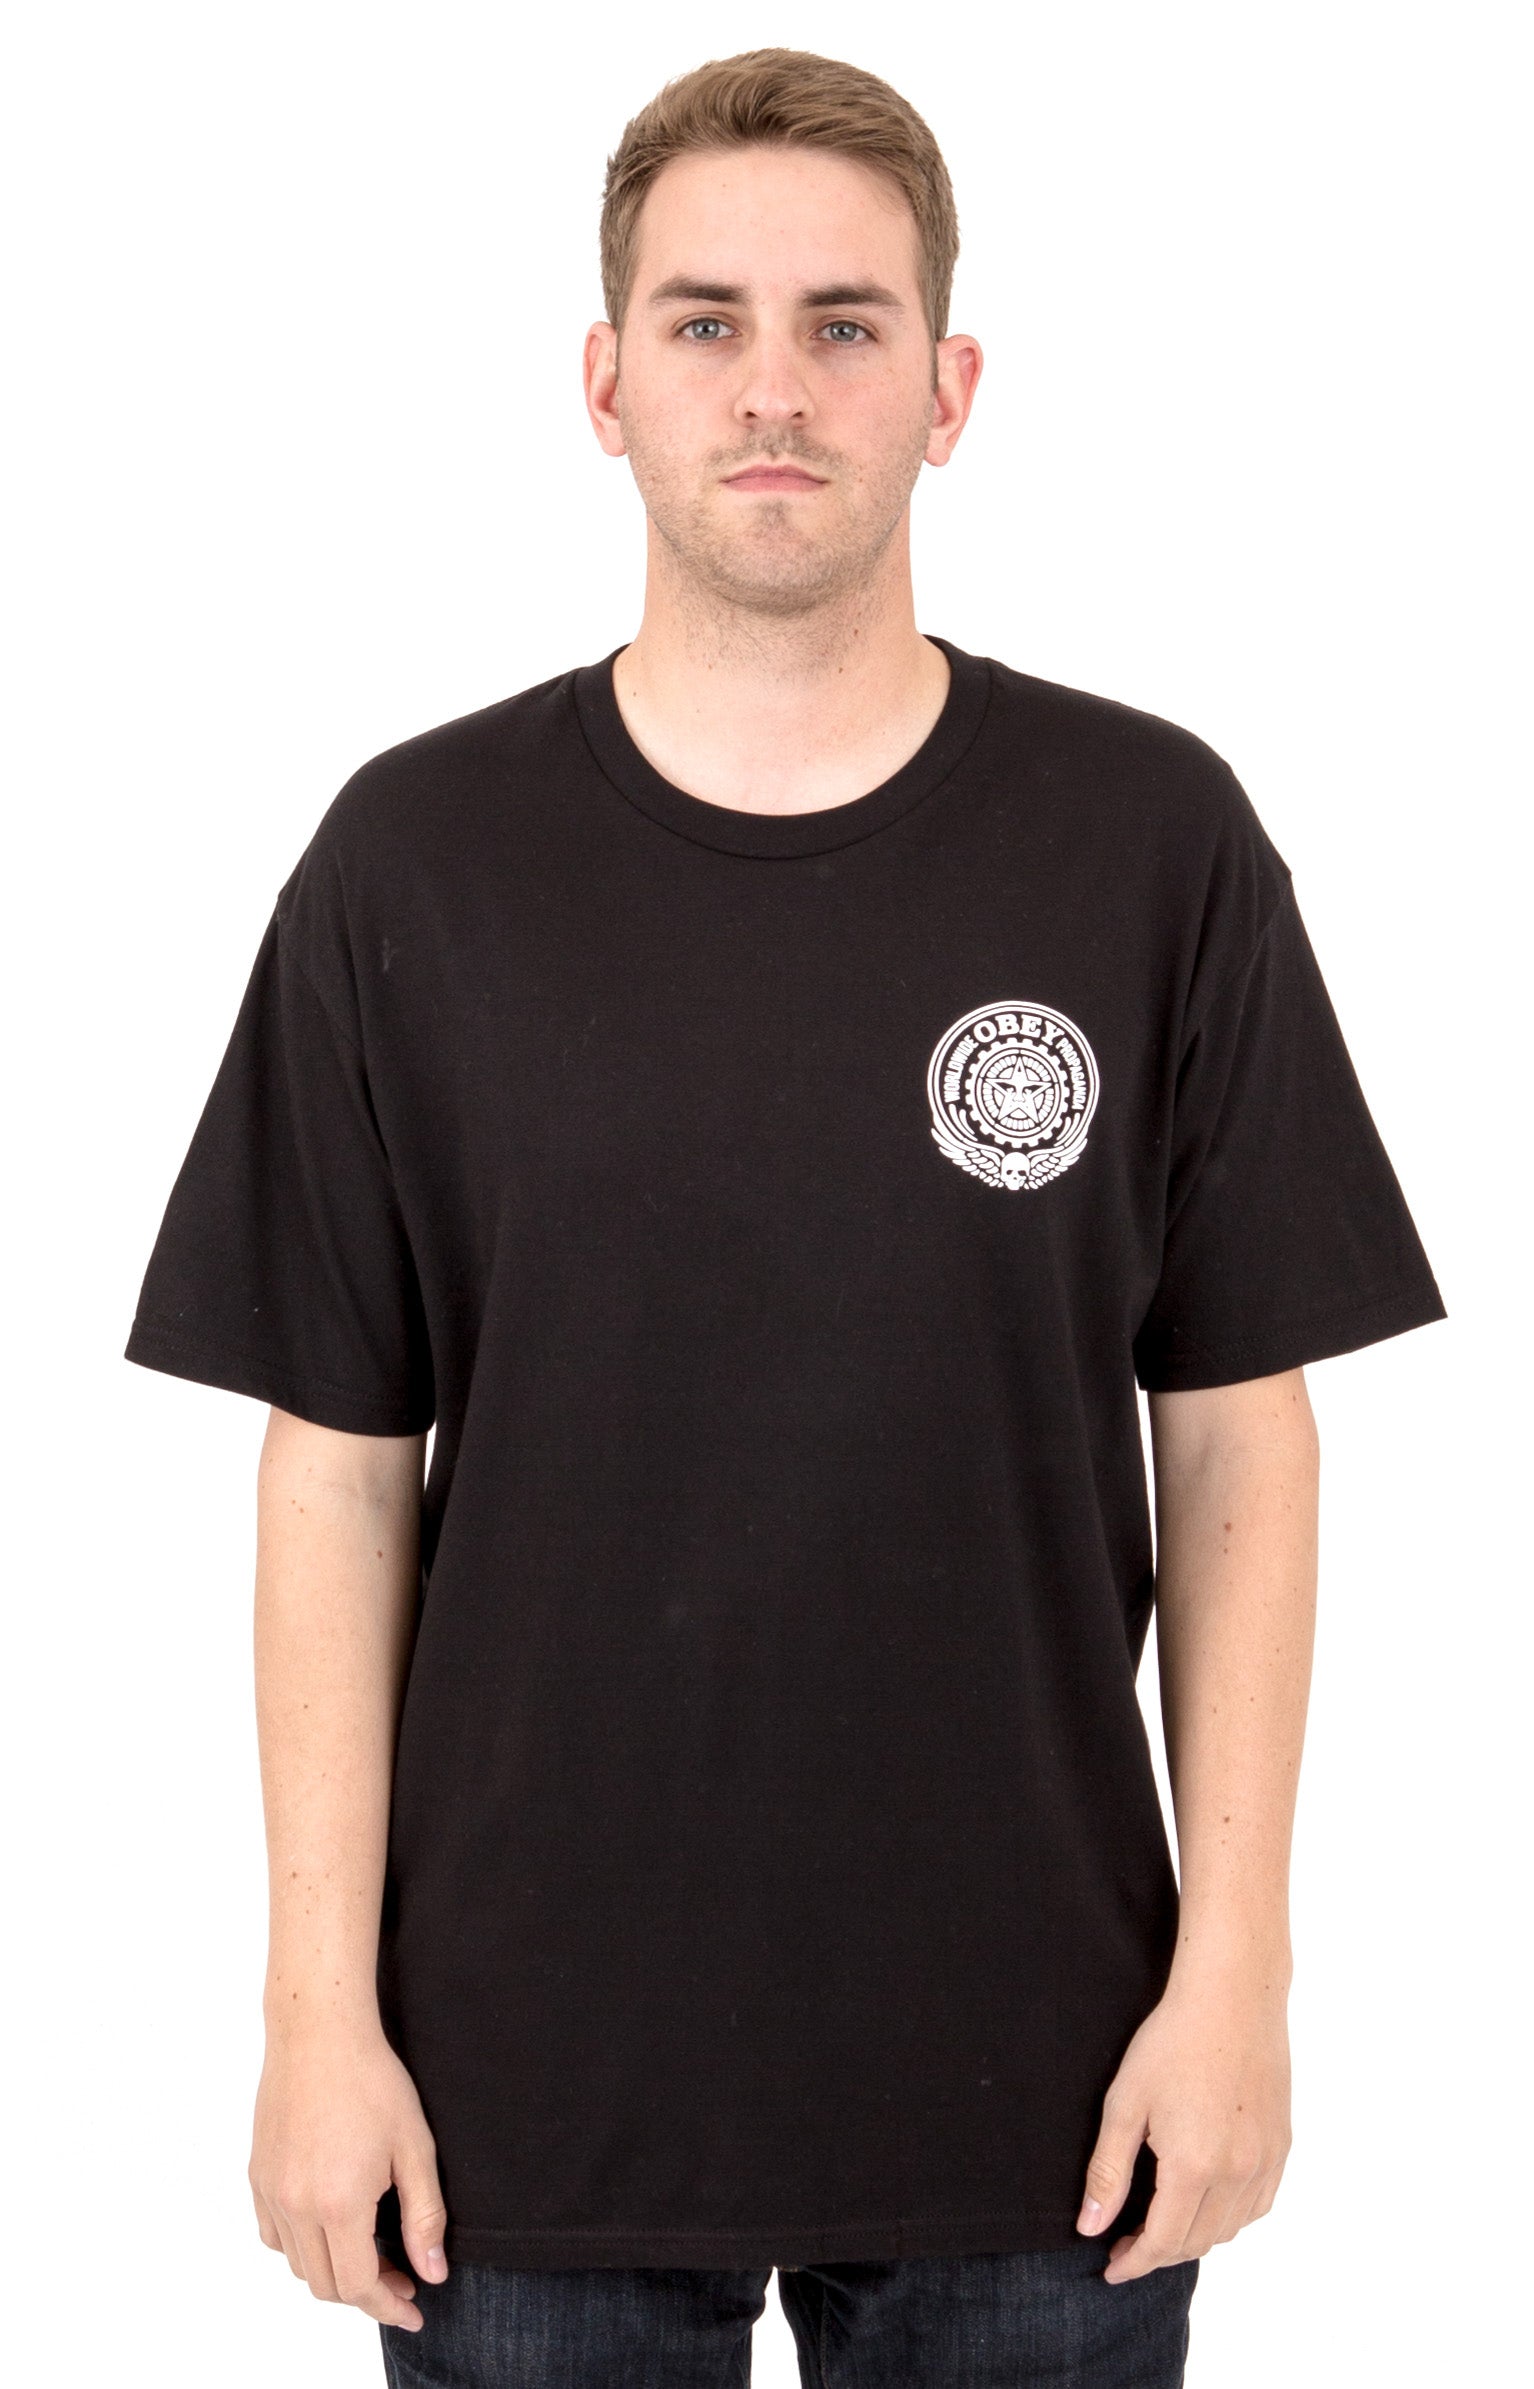 Obey Skull And Wings T-Shirt - Black